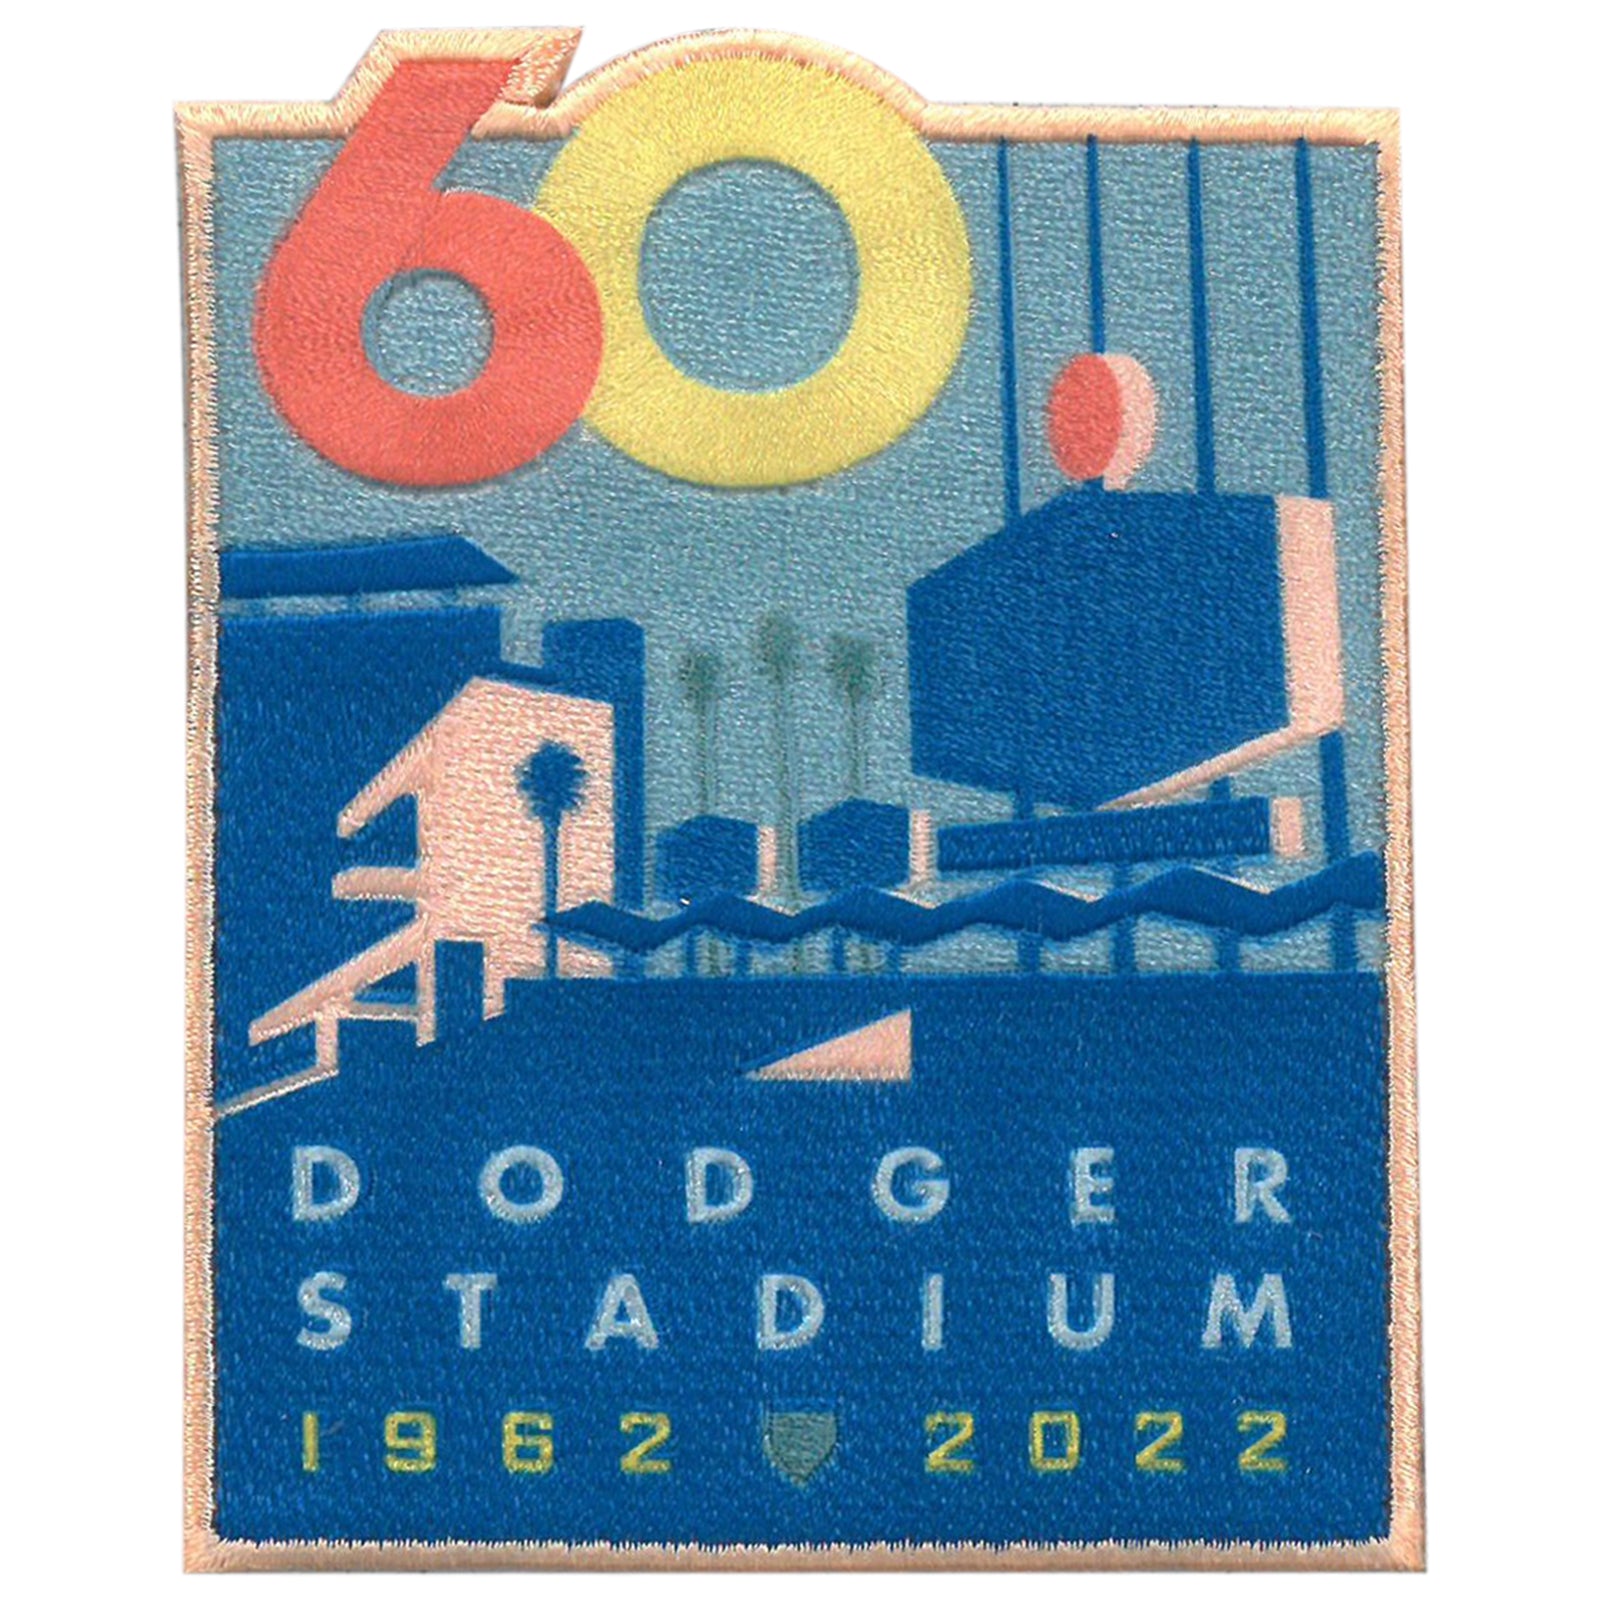 60th anniversary patch